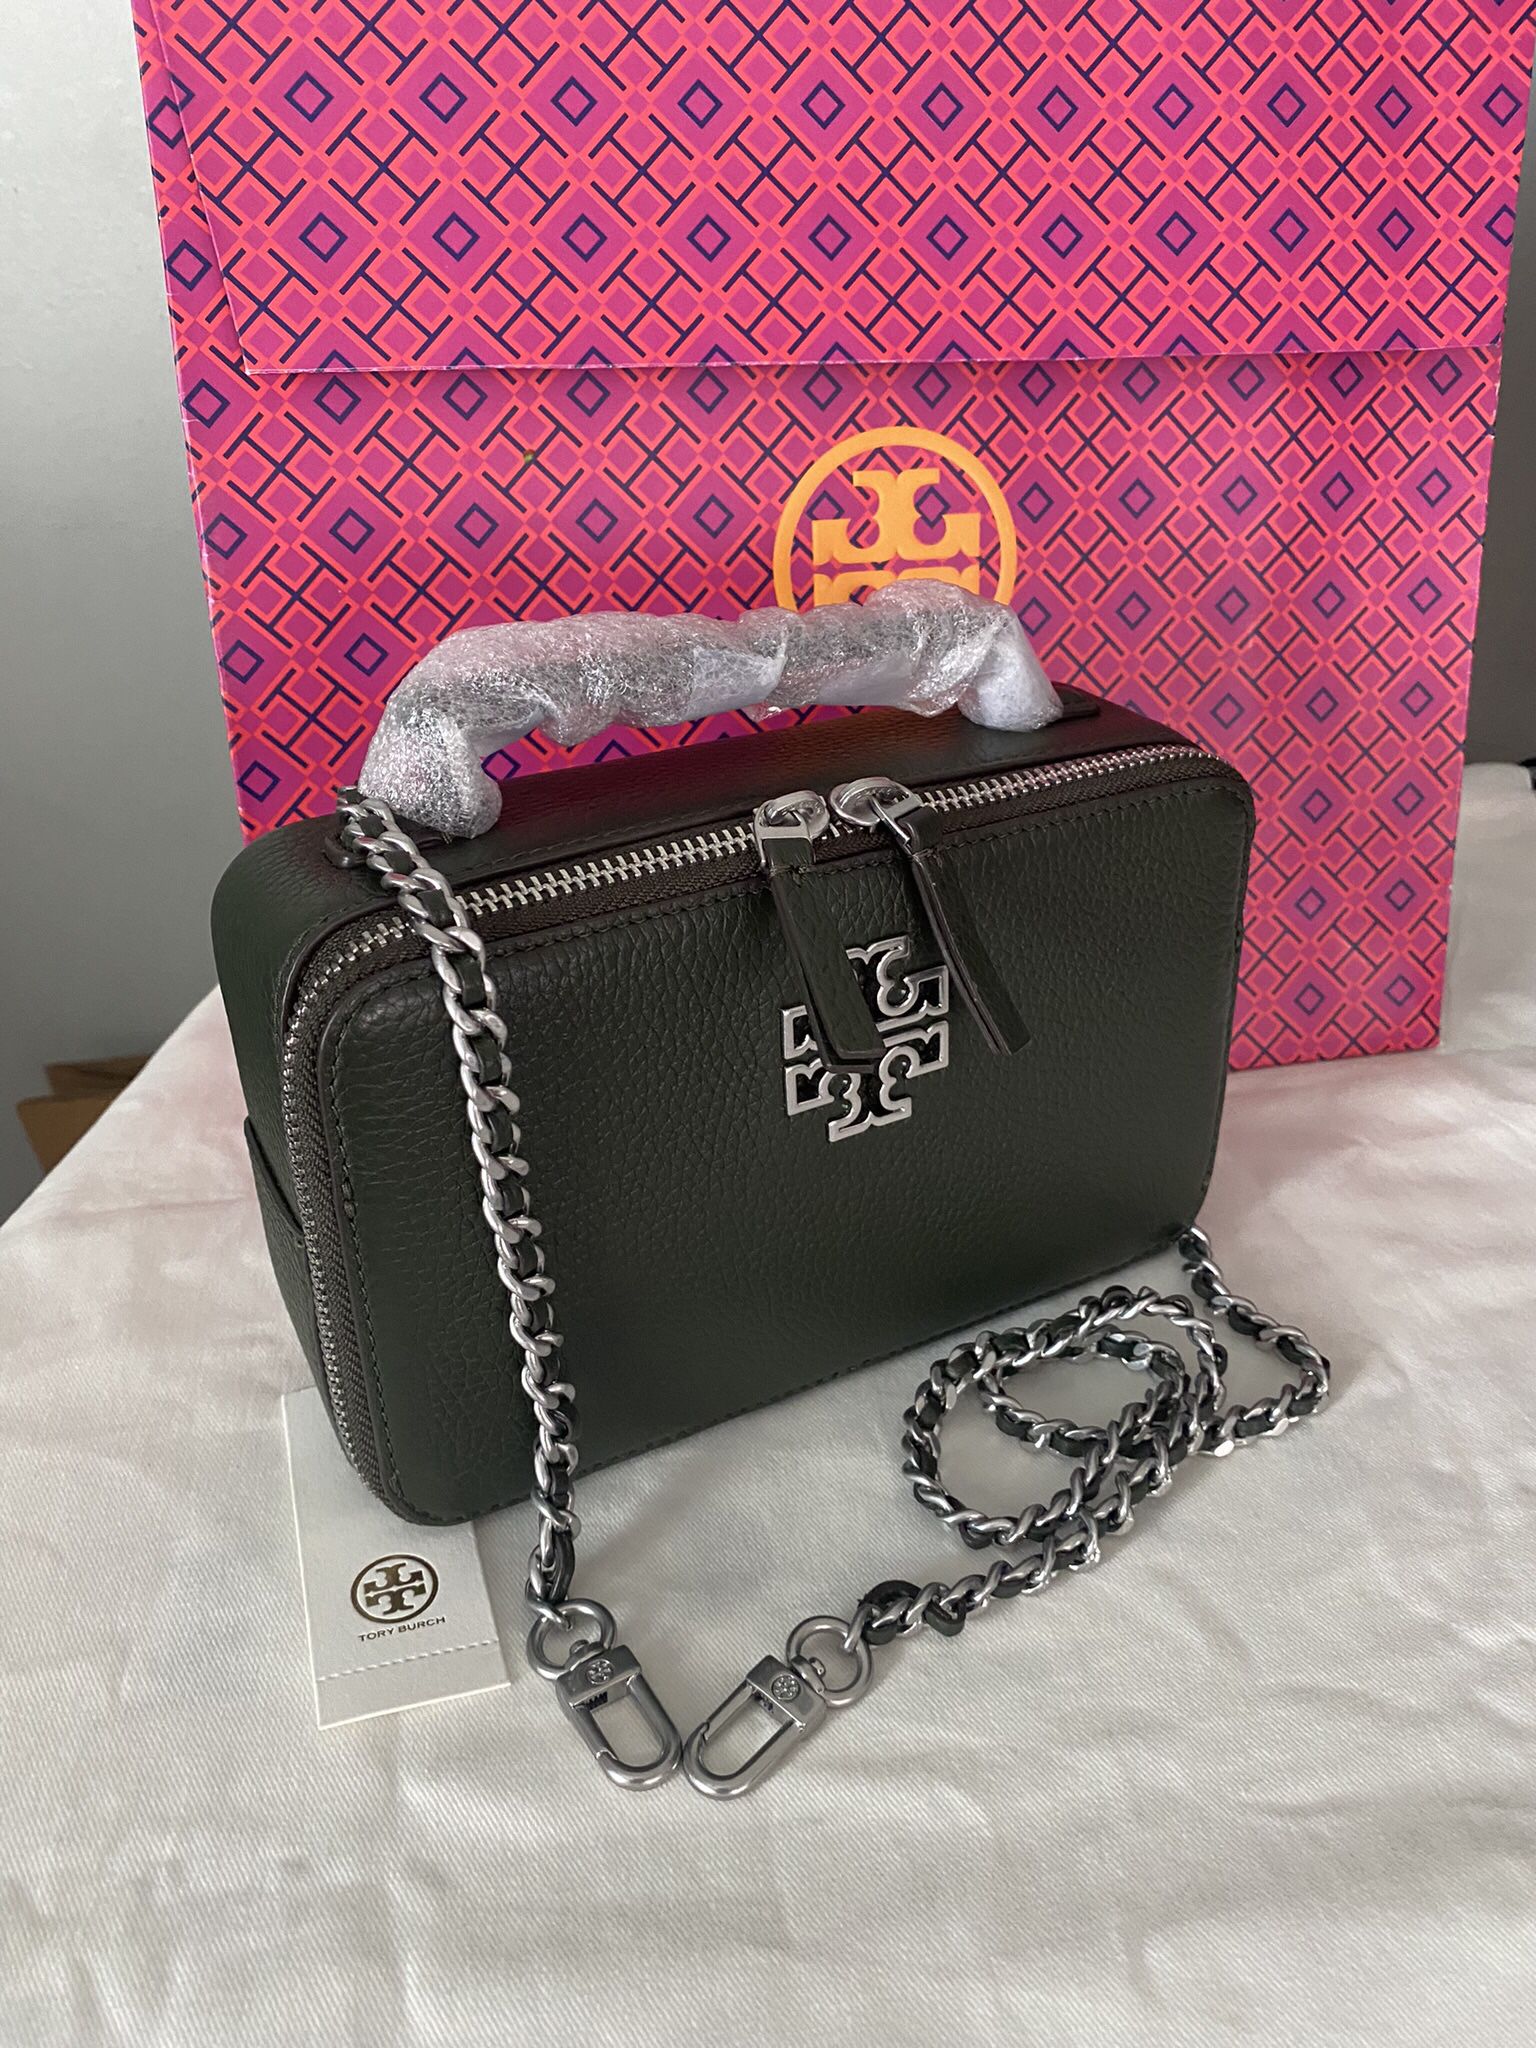 Tory Burch dust bag New 13.25x10 inches in cotton for Sale in Carlsbad, CA  - OfferUp